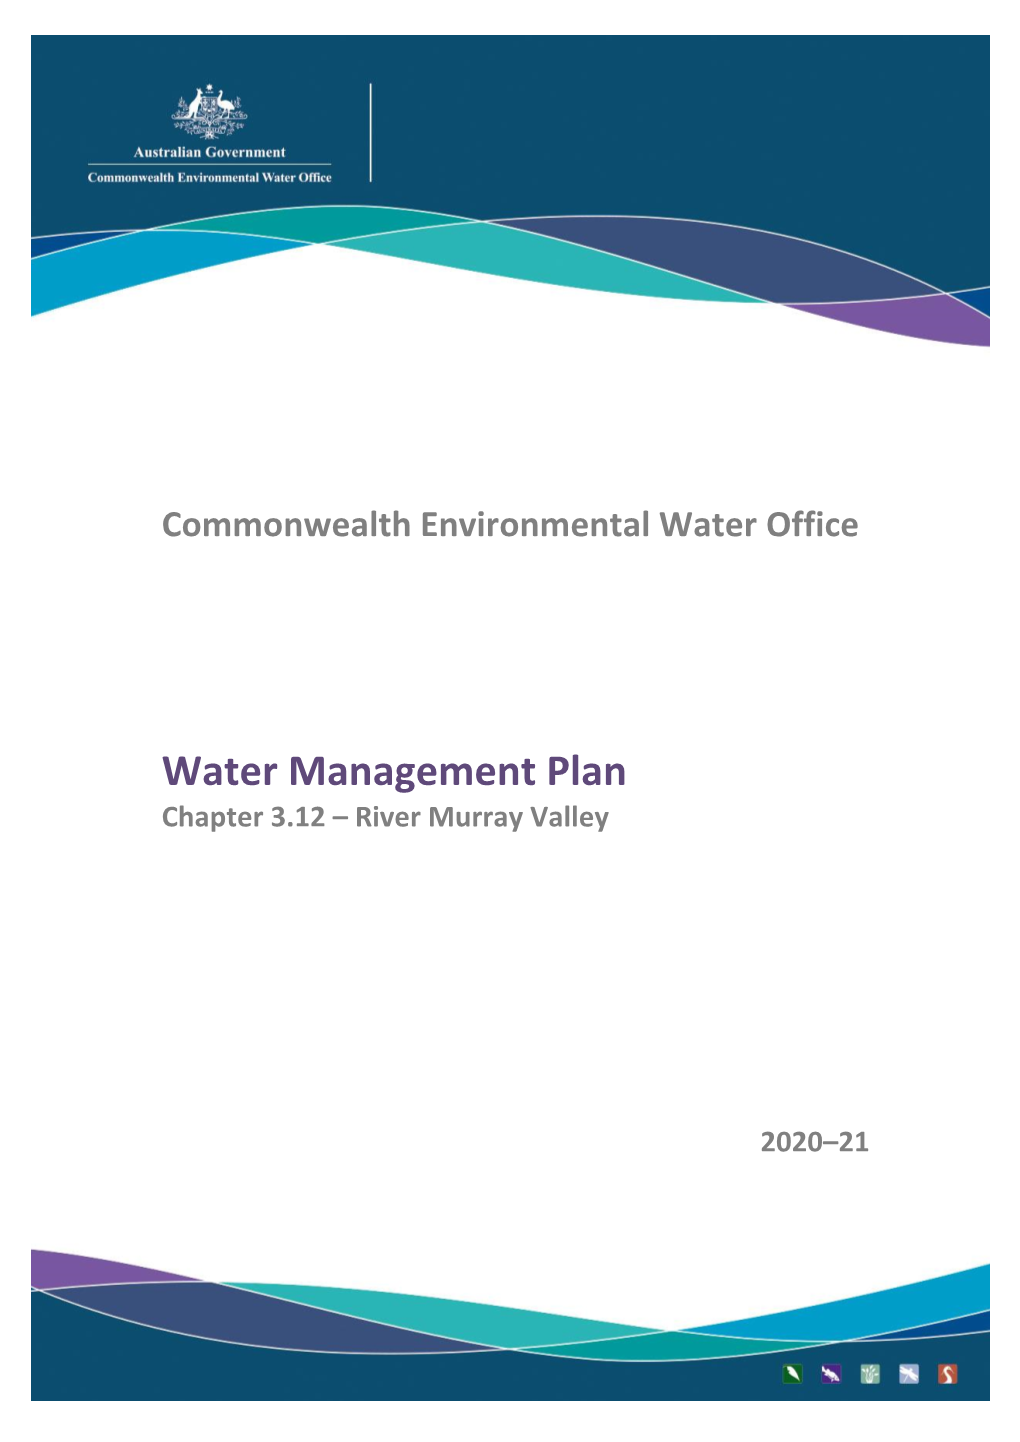 Water Management Plan 2020-21: Chapter 3.12